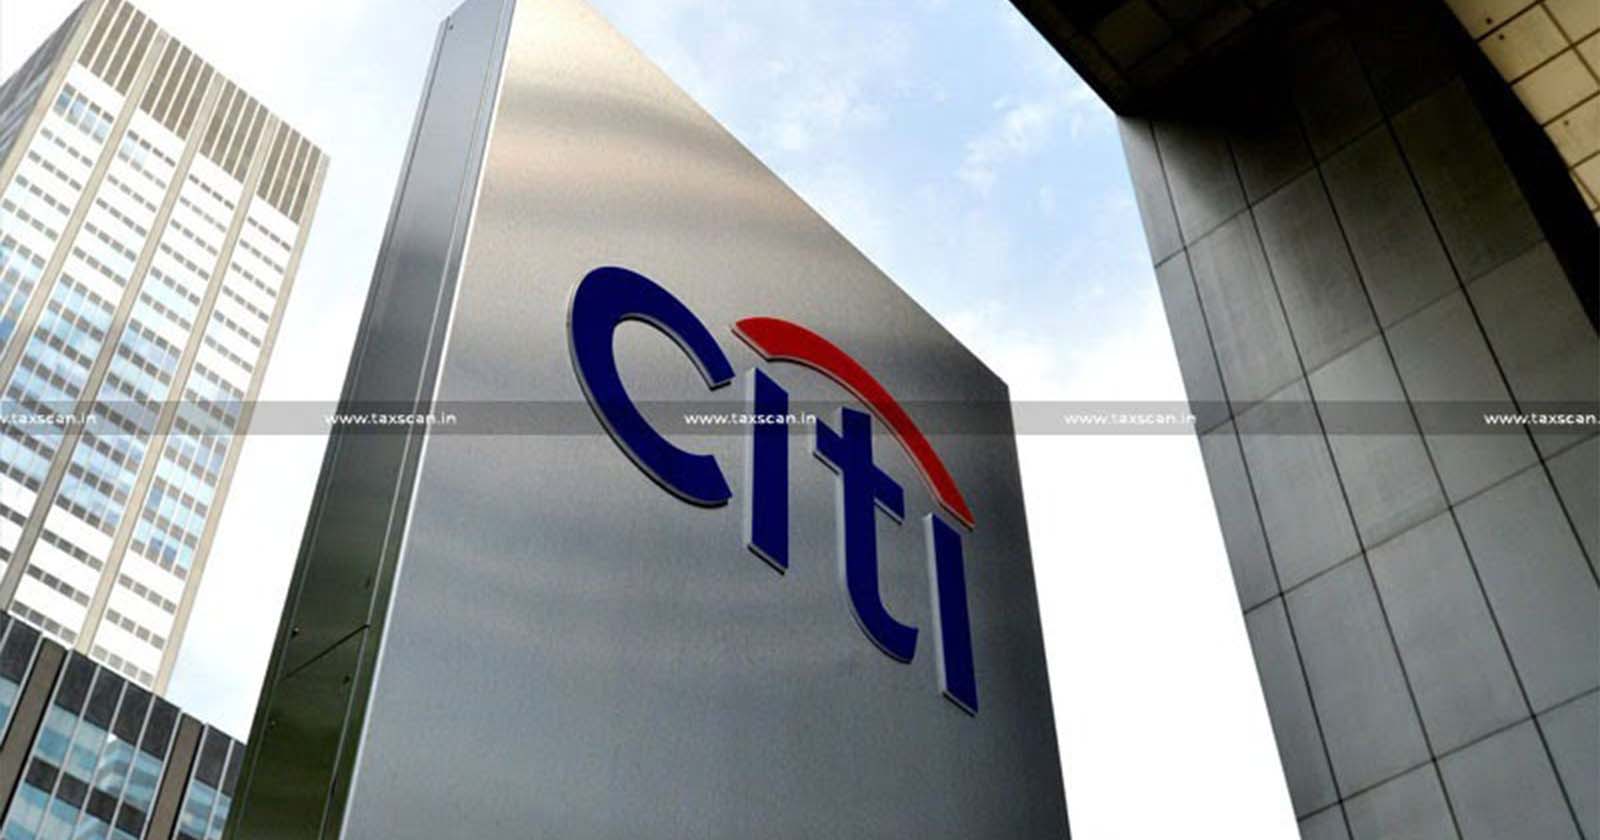 Chartered Accountant - CA Vacancy in Citi - Chartered Accountant Vacancies in Citi - TAXSCAN